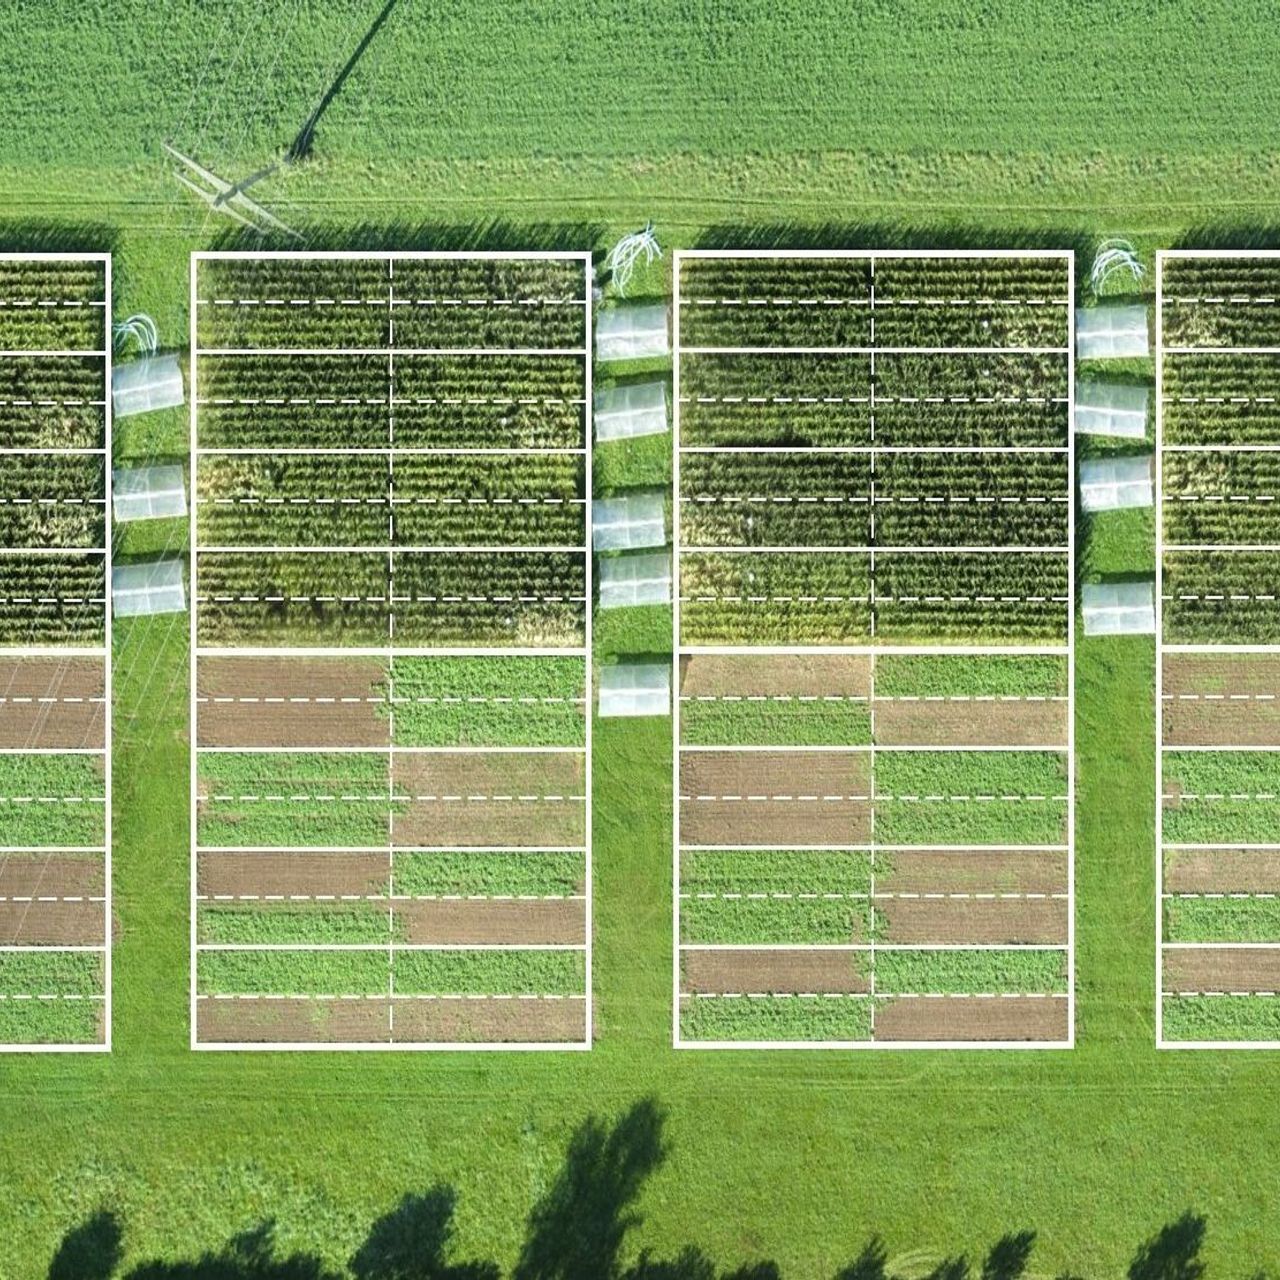 The agricultural systems and tillage experiment of the Agroscope agency in Zurich evaluates the effects of organic, conservation and conventional arable agriculture on plant yields and a wide range of ecosystem services: it was also tested how different agricultural practices respond to simulated drought, recreated through plastic screens…